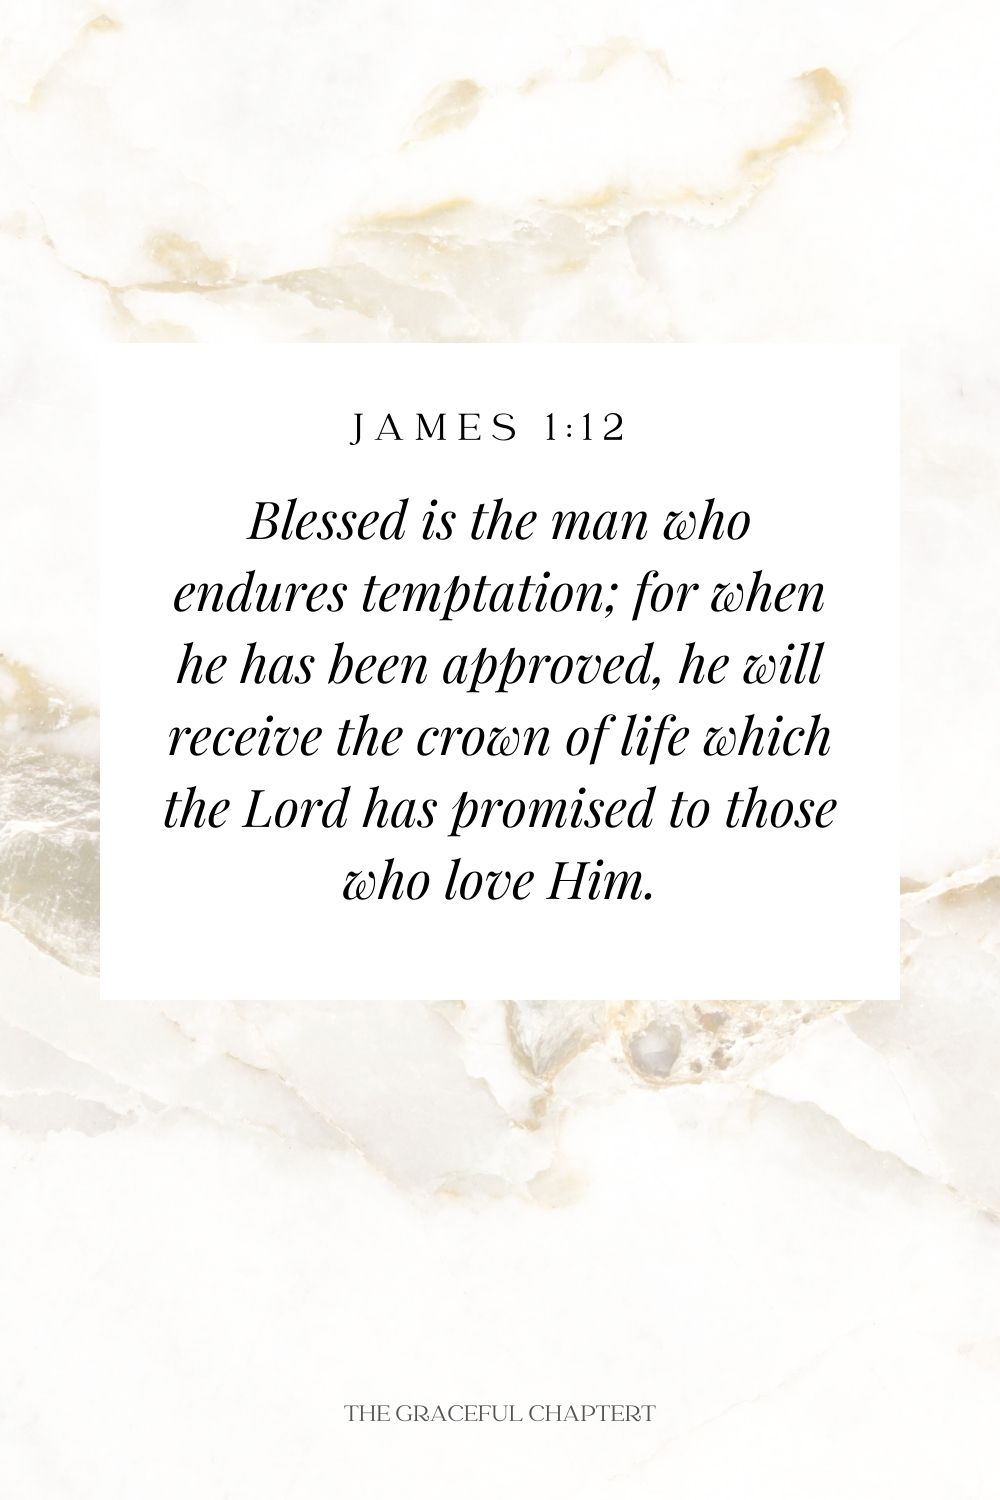 Blessed is the man who endures temptation; for when he has been approved, he will receive the crown of life which the Lord has promised to those who love Him. James 1:12